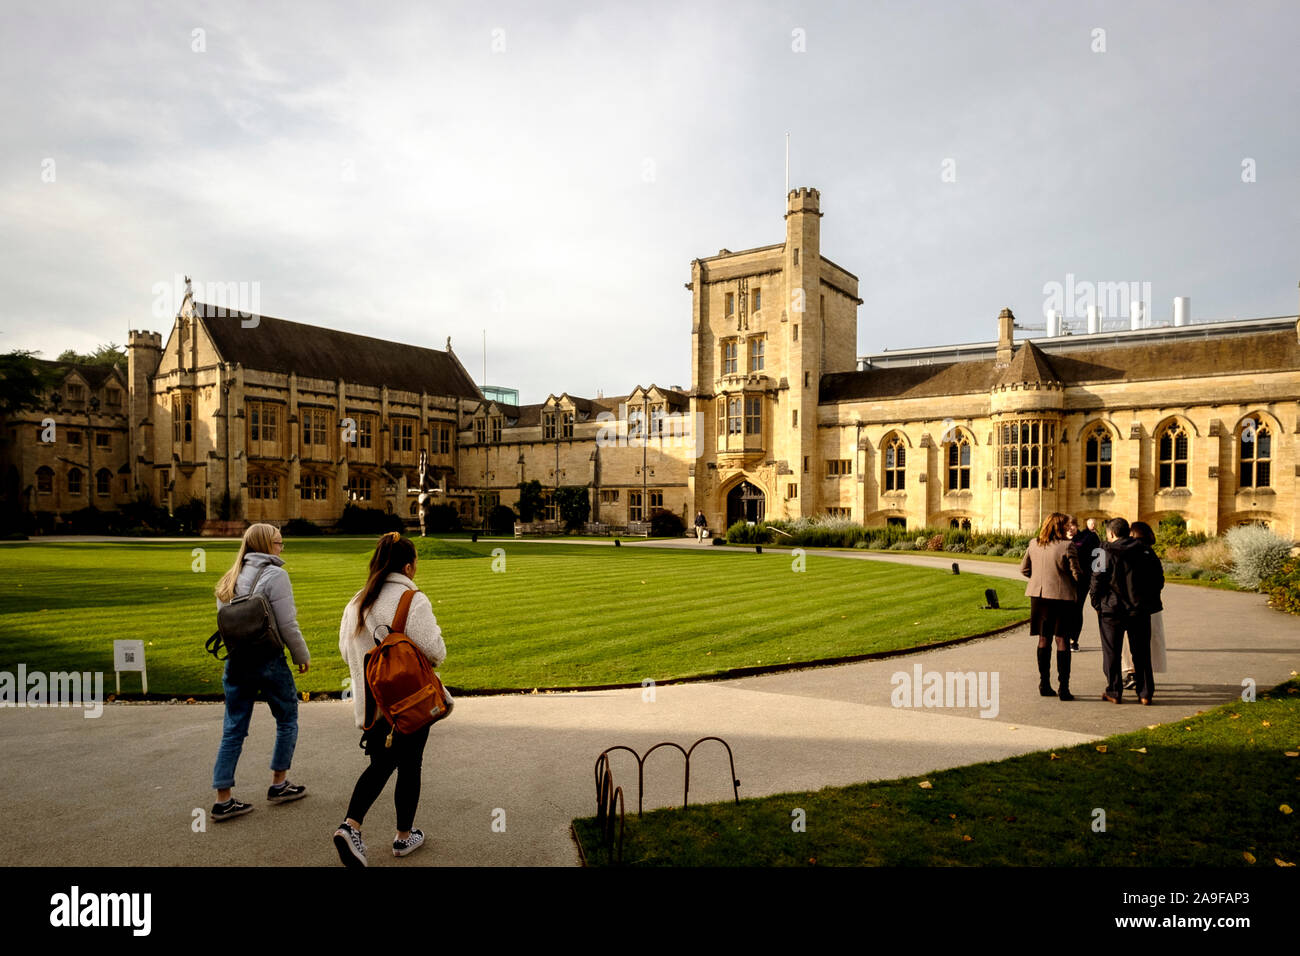 Mansfield College, University of Oxford - an Anthony Gormley sculpture in the centre of the lawn Stock Photo